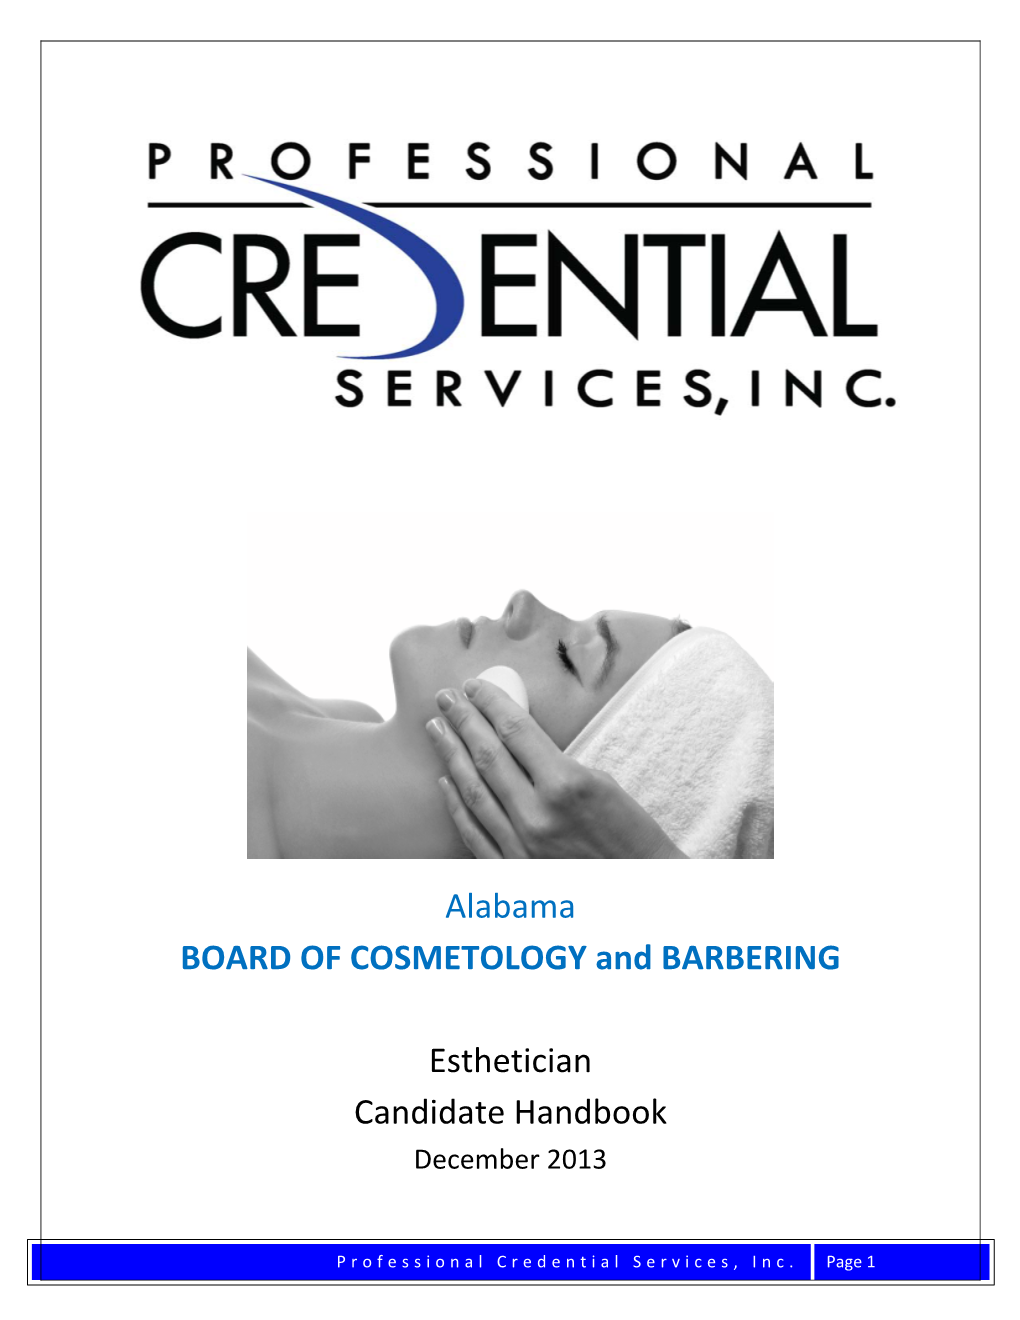 Alabama BOARD of COSMETOLOGY and BARBERING